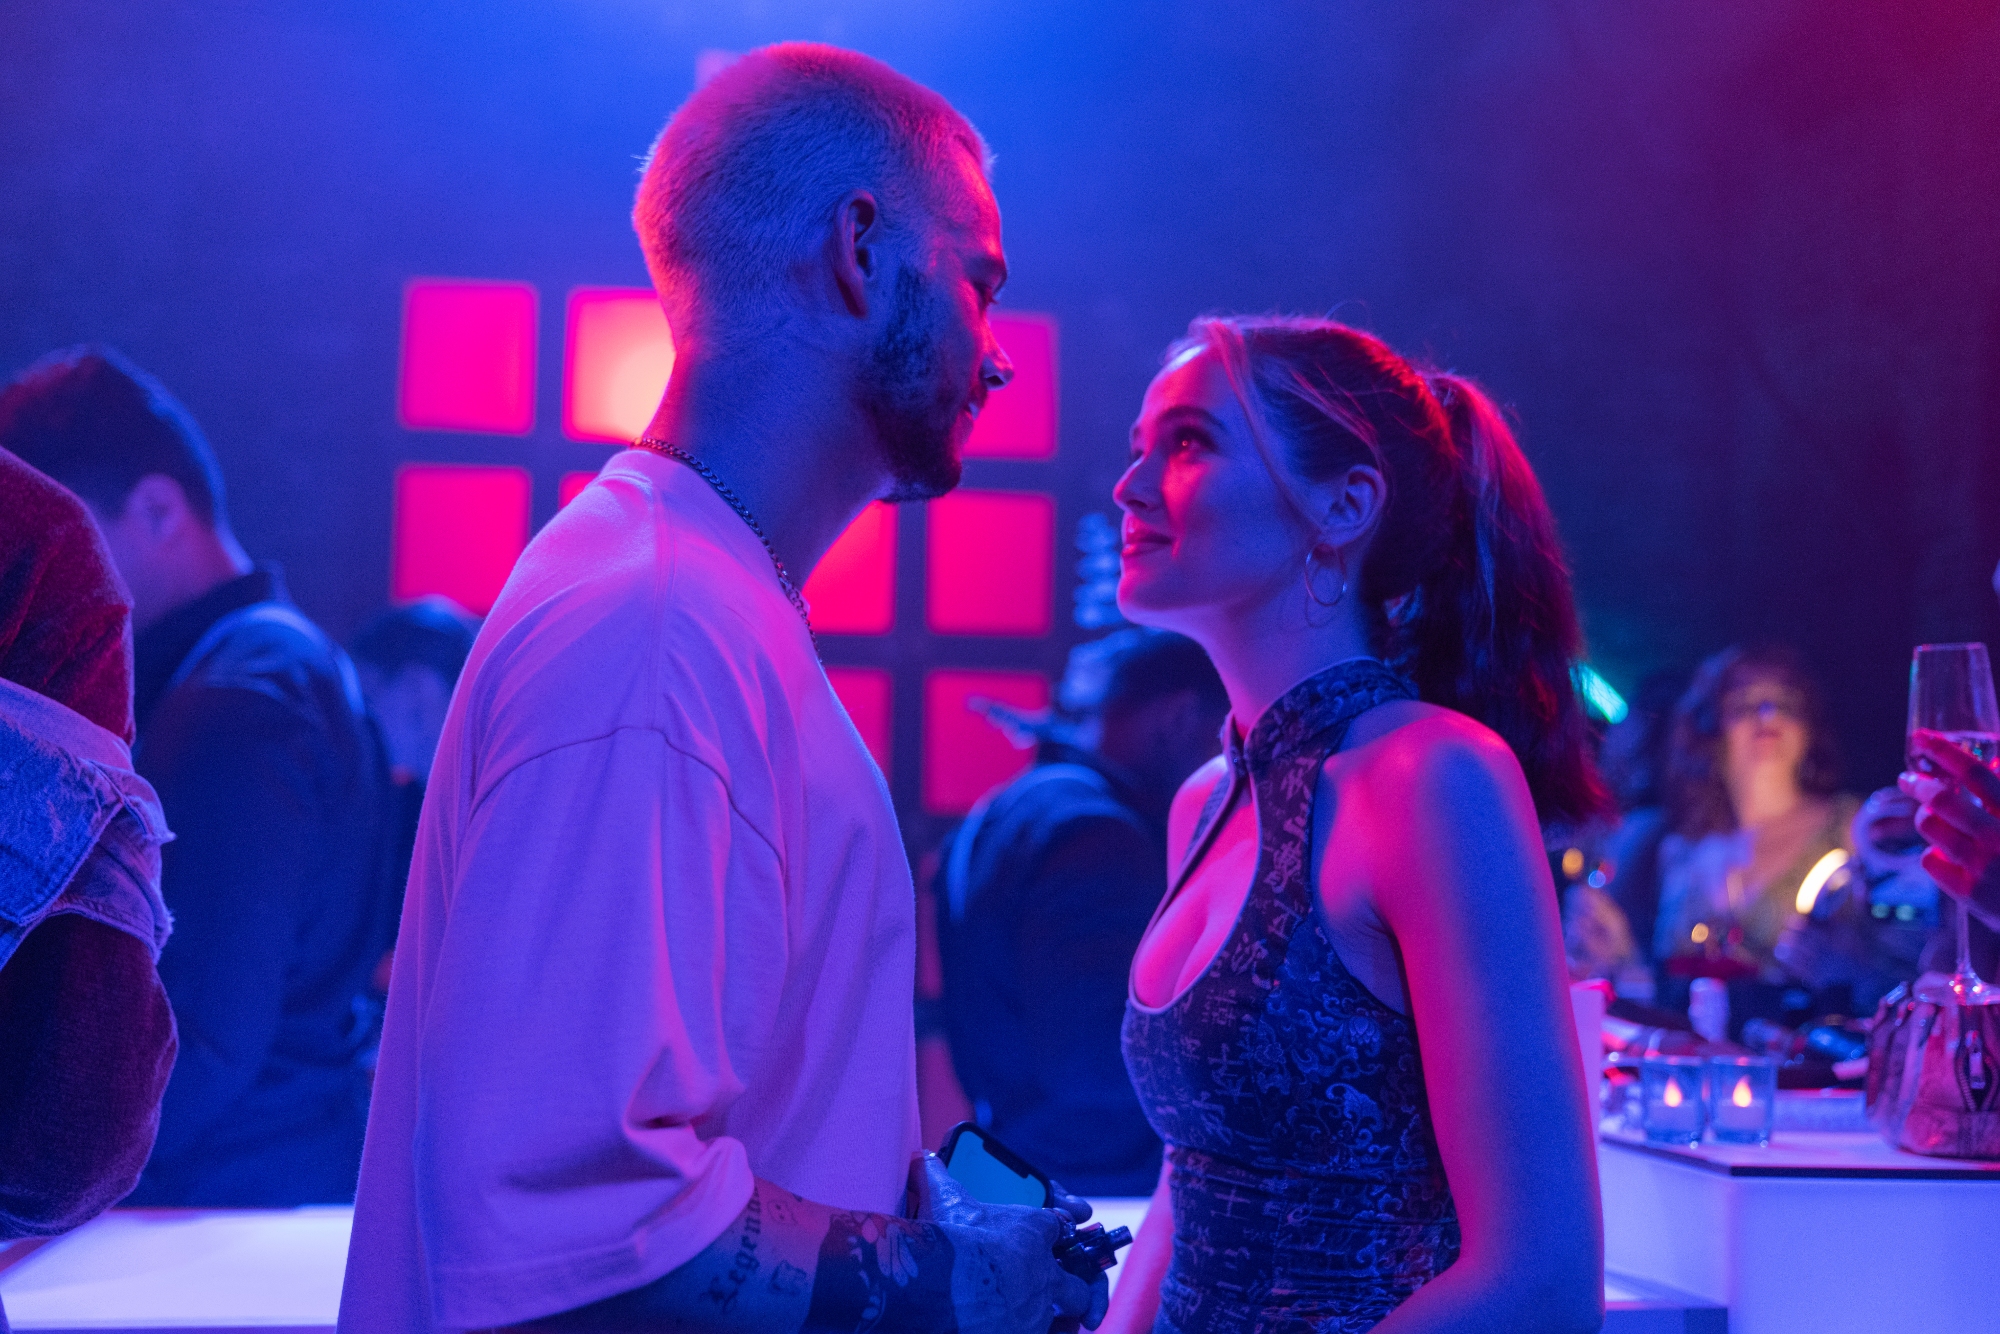 'Not Okay' Dylan O'Brien as Colin and Zoey Deutch as Danni Sanders looking into each other's eyes in front of a bar with neon purple lighting